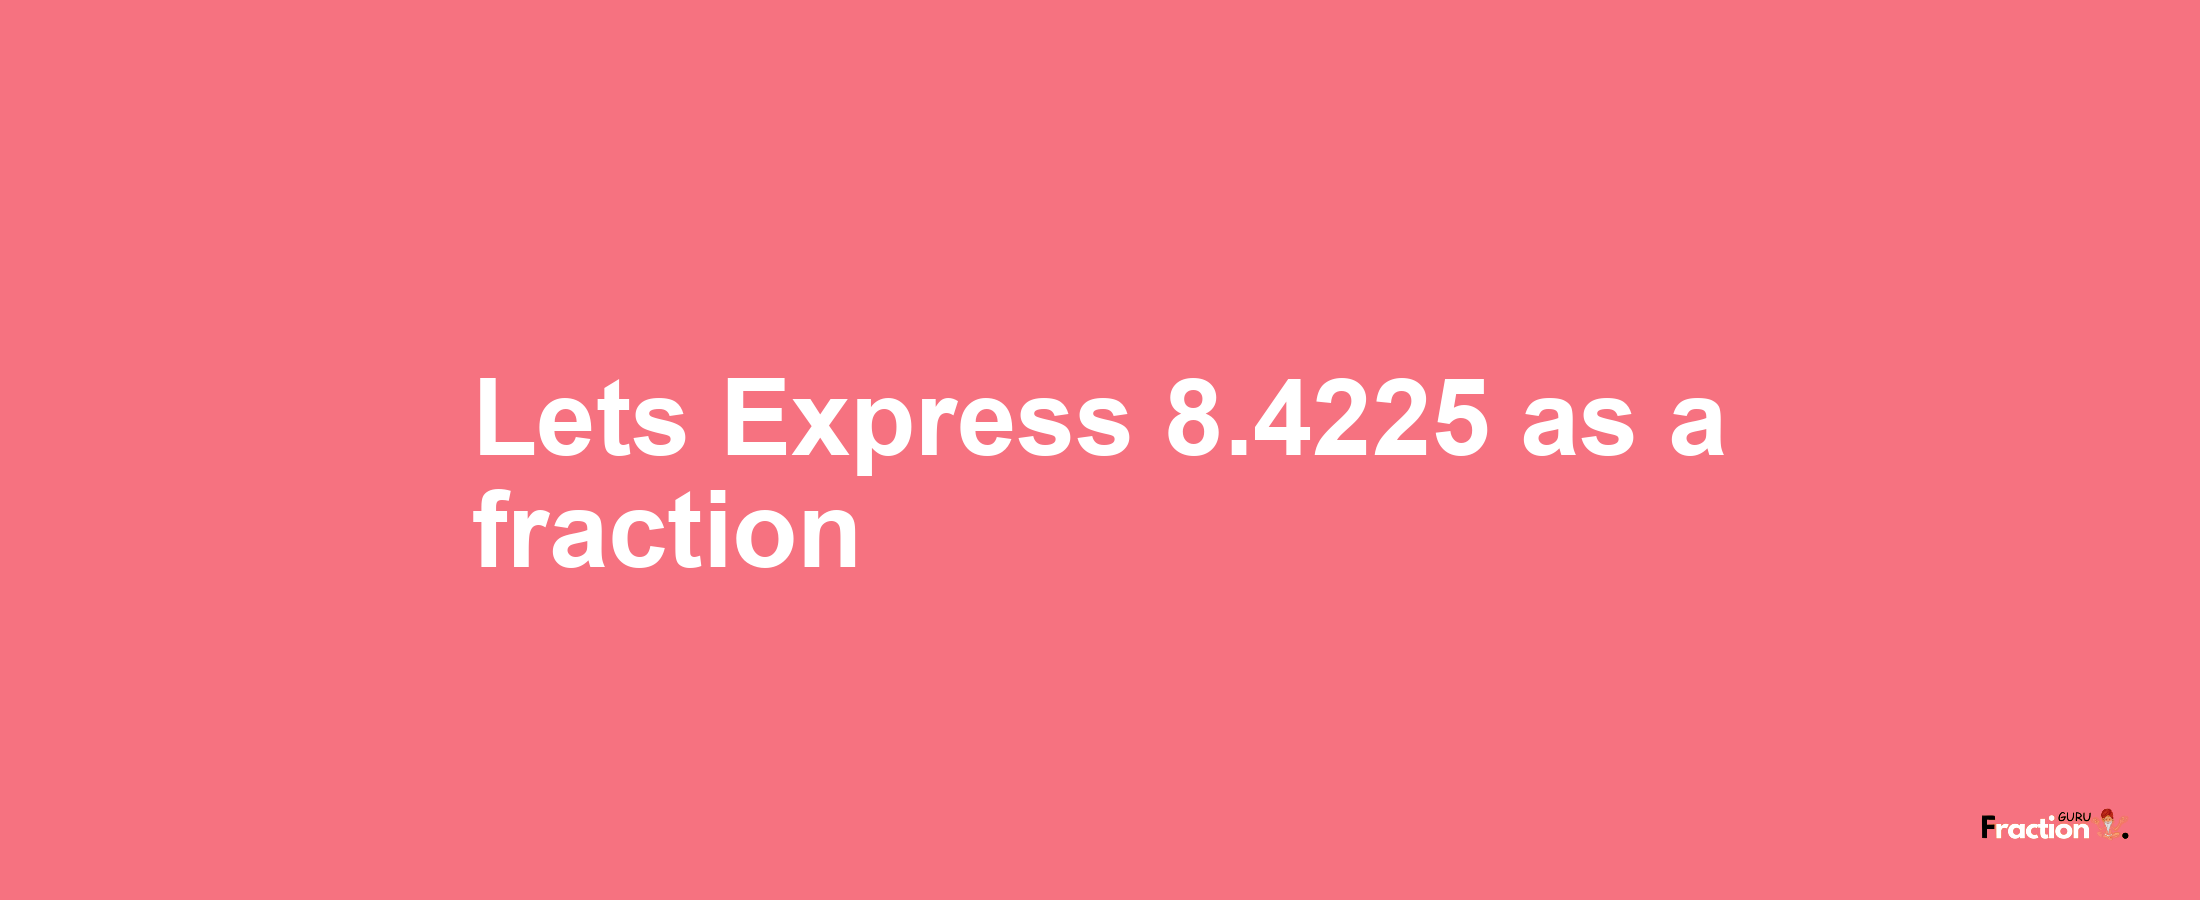 Lets Express 8.4225 as afraction